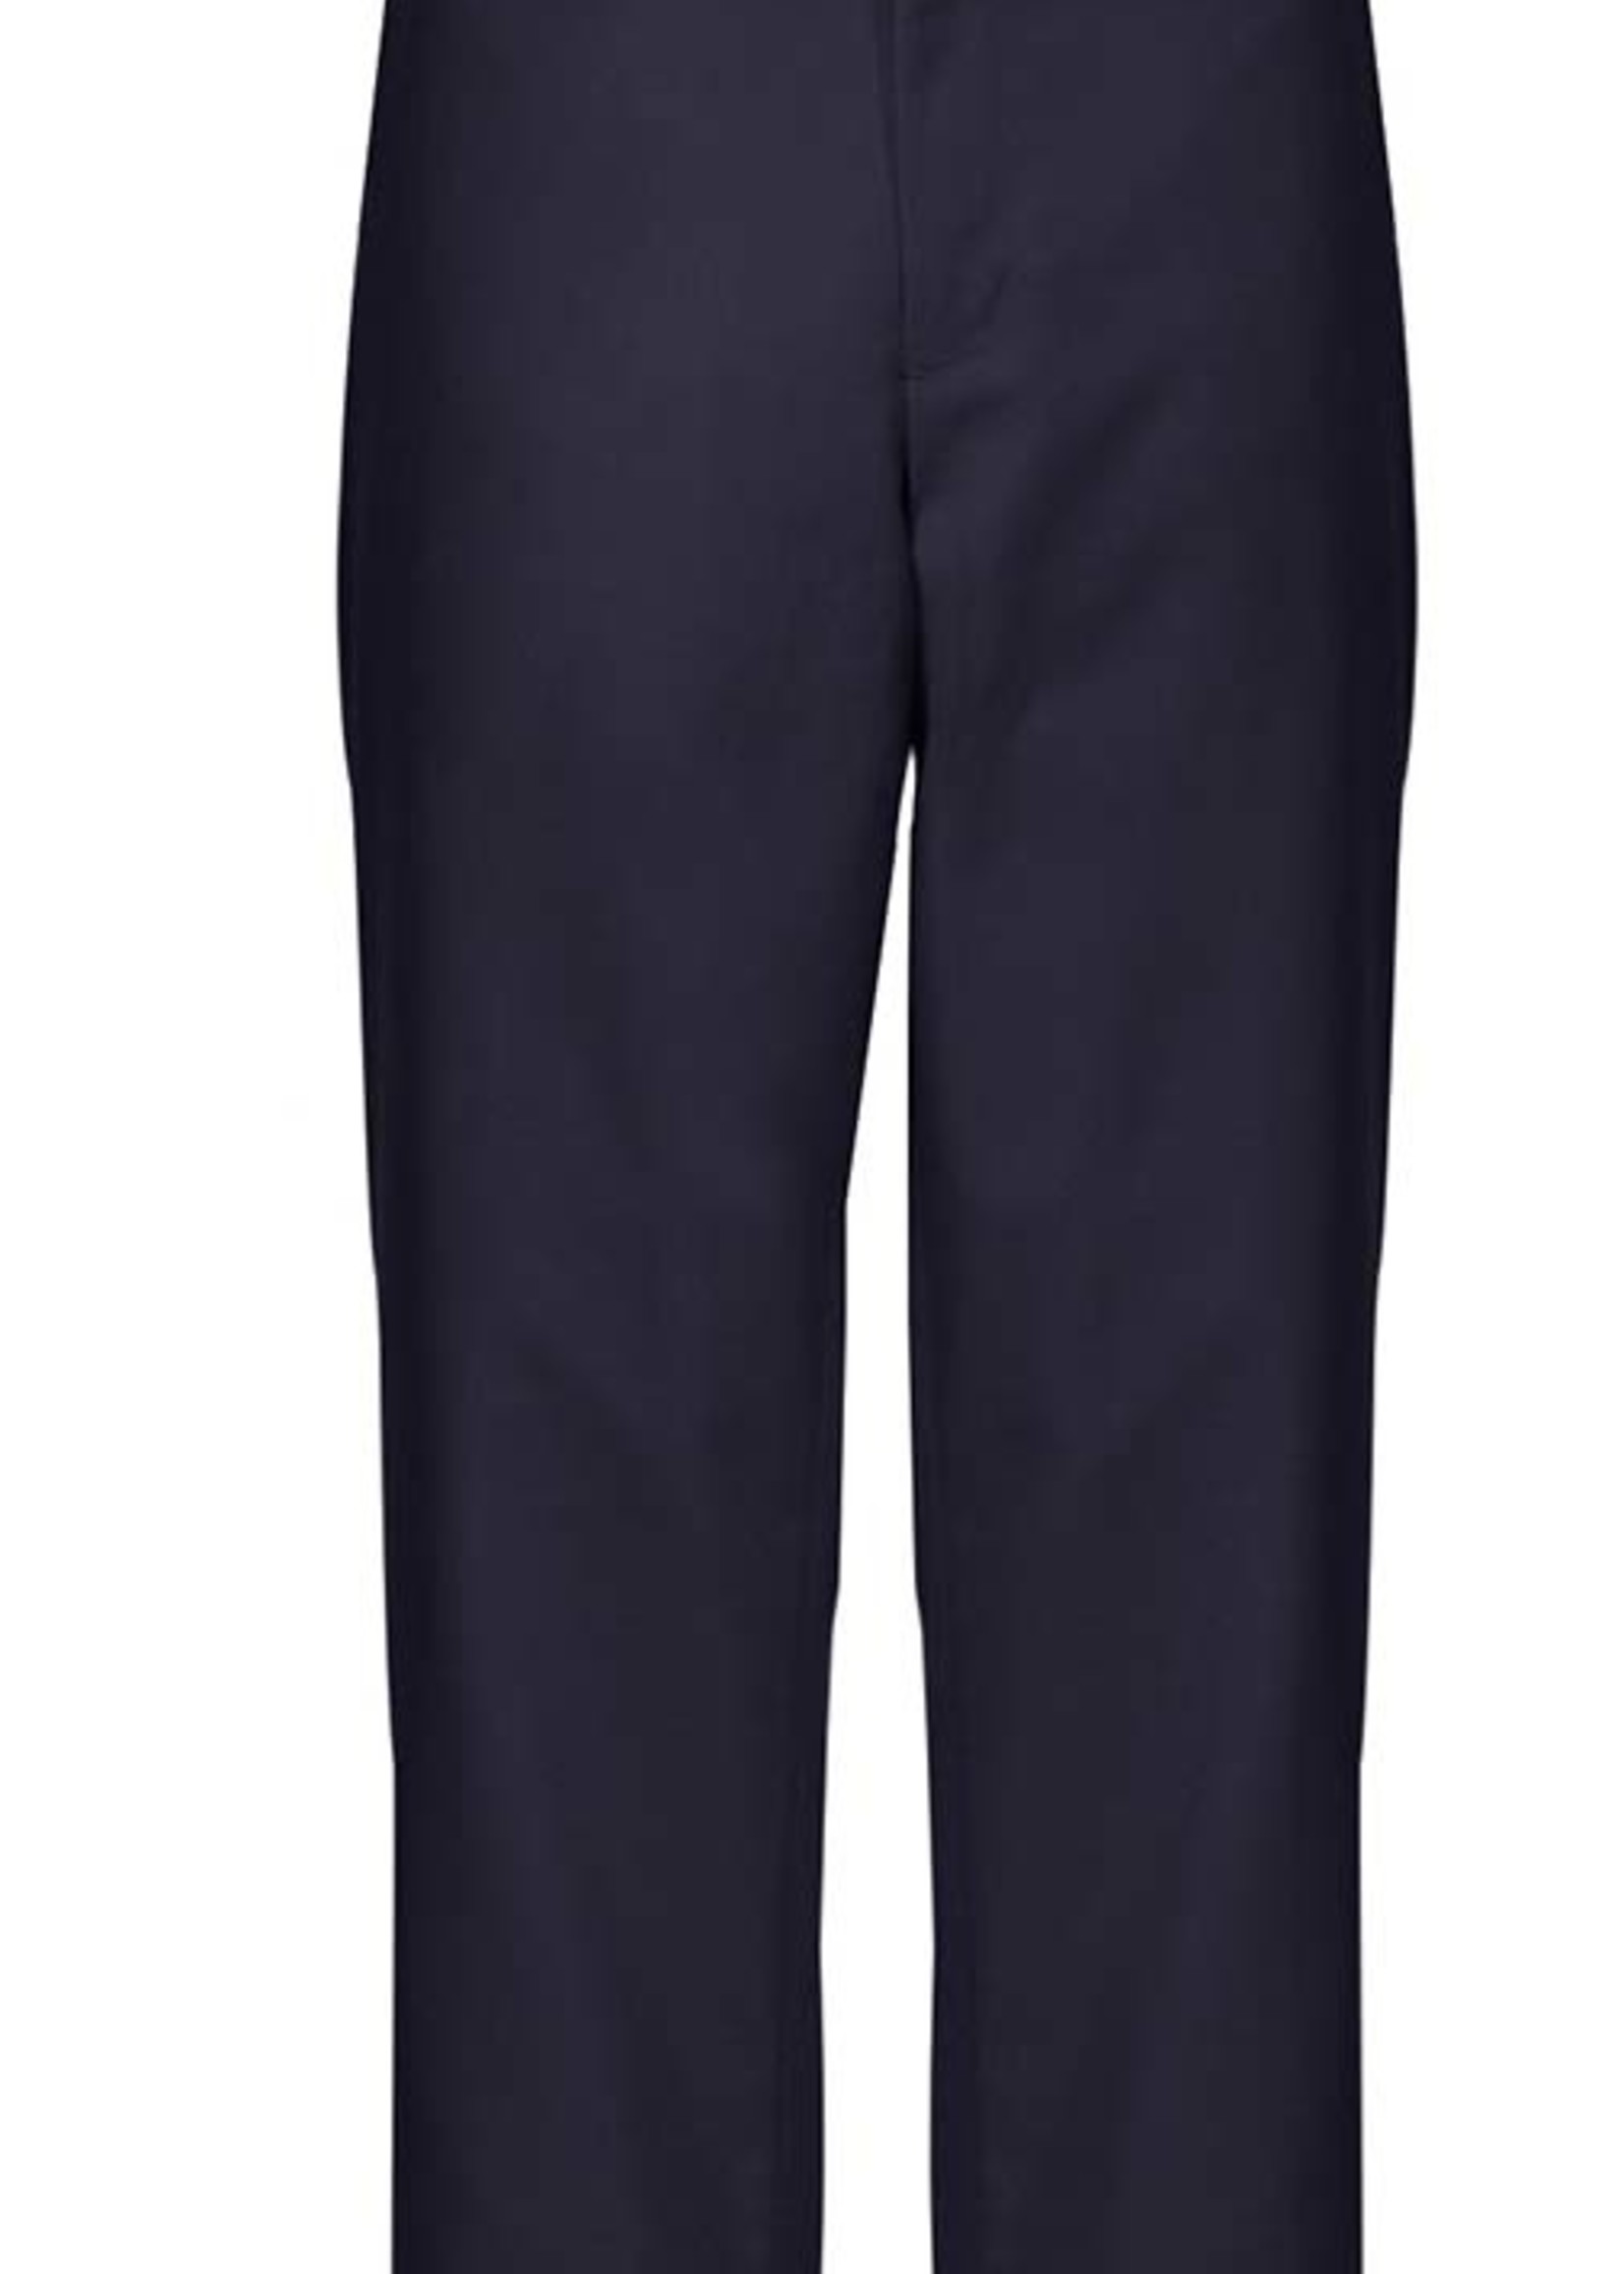 A+ Mens Flat Front Pants (KN) with logo